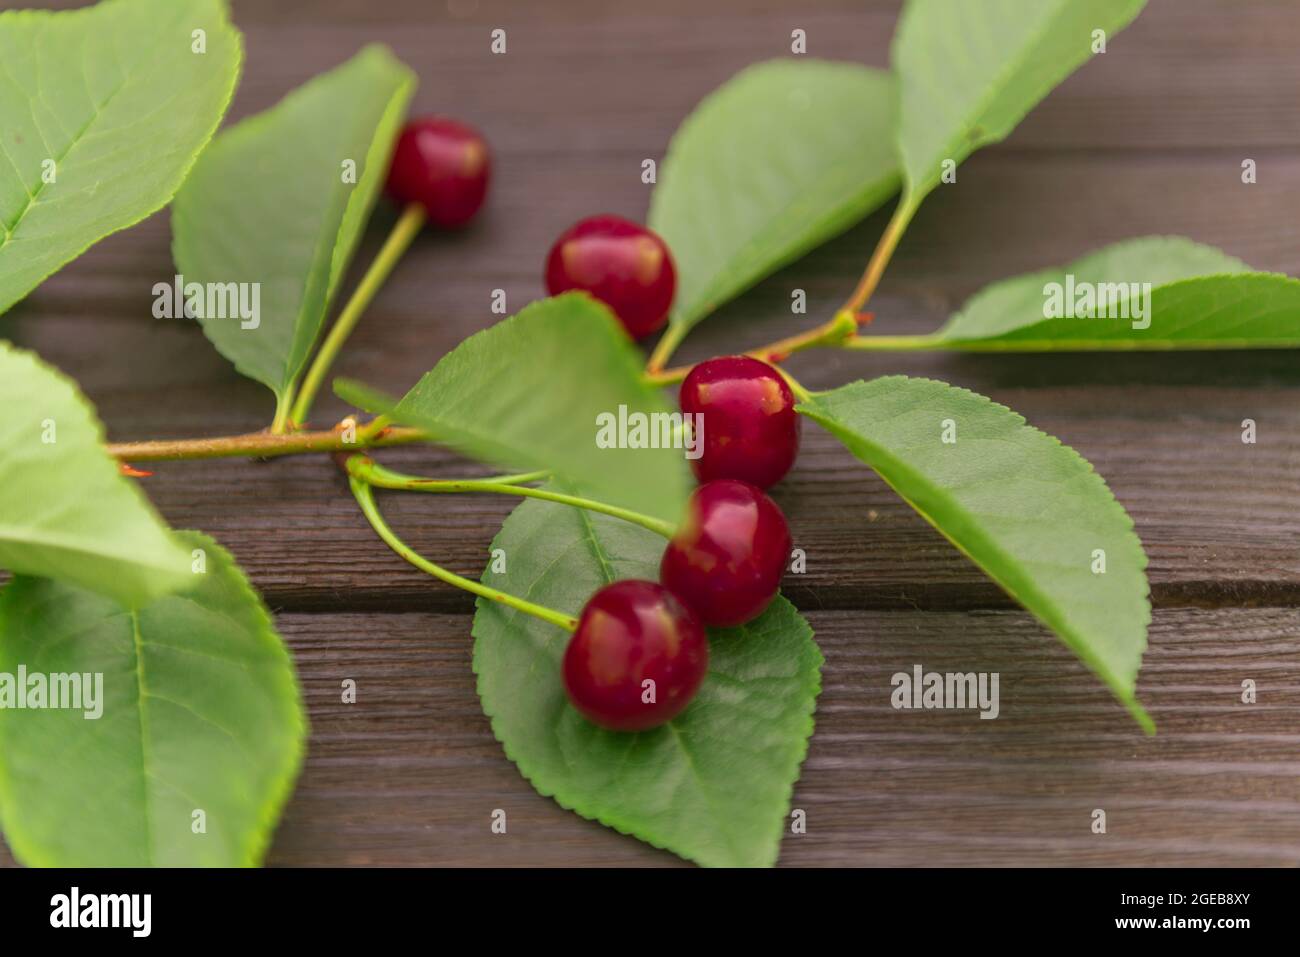 Cherries arranged on a base made of black boards. There is a twig with leaves under the fruit. Stock Photo